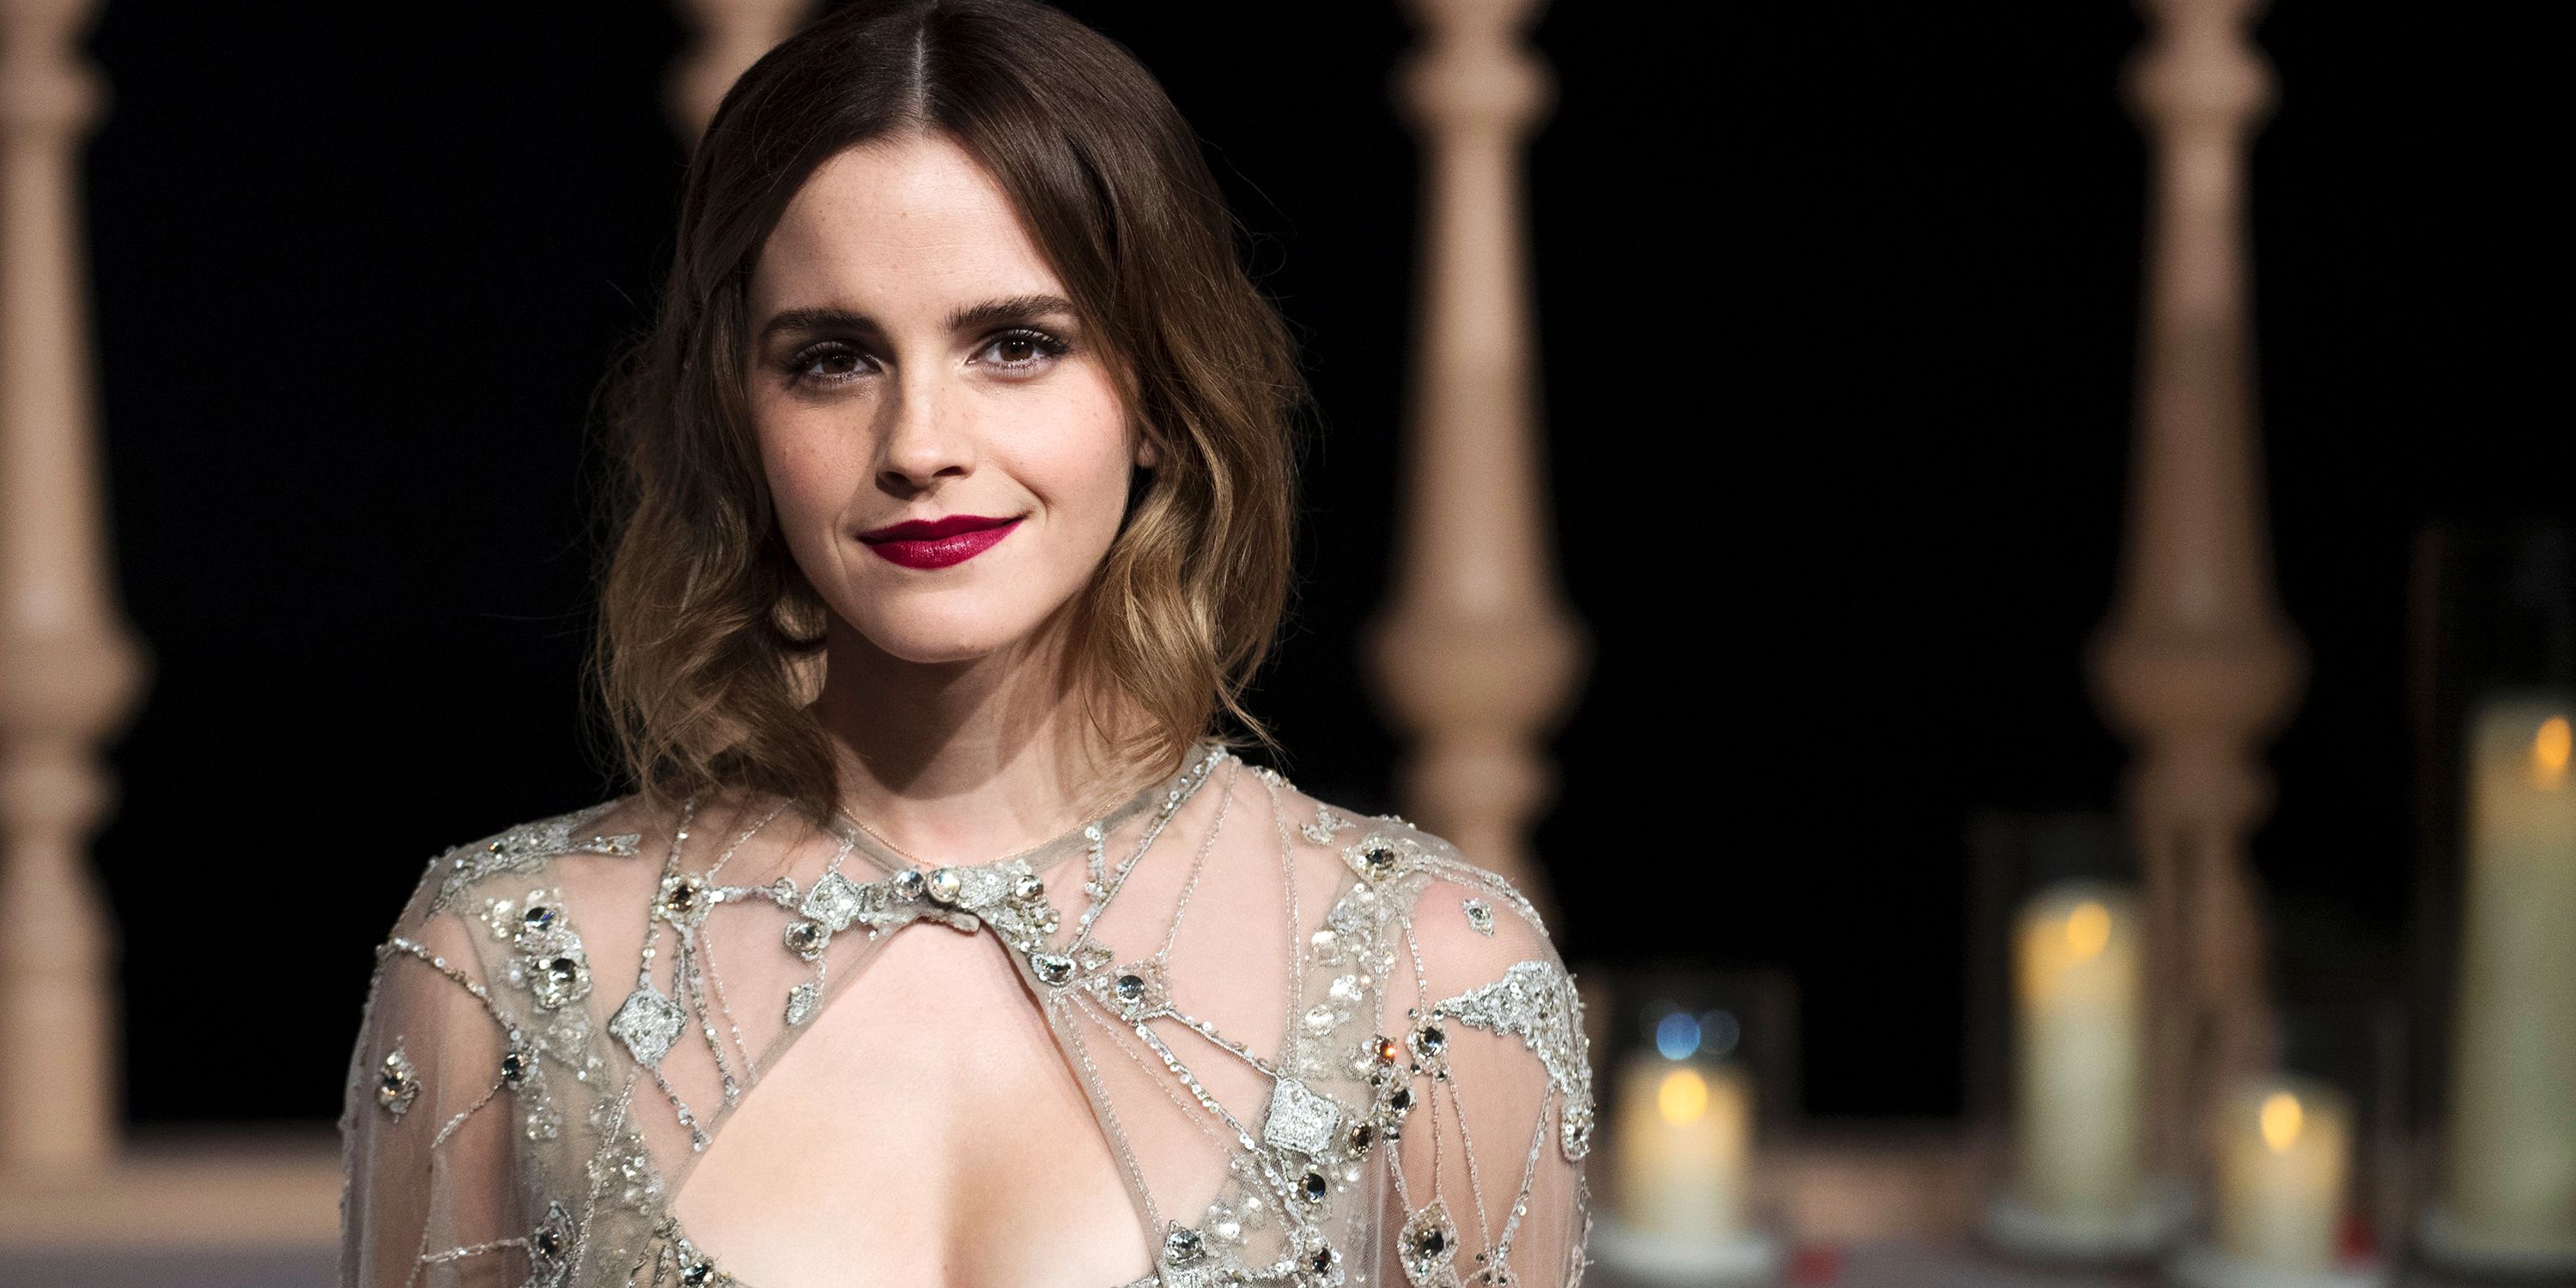 Emma Watson reveals she has the hots for Aslan from the Chronicles of Narnia  in revealing red carpet interview about Beauty and the Beast